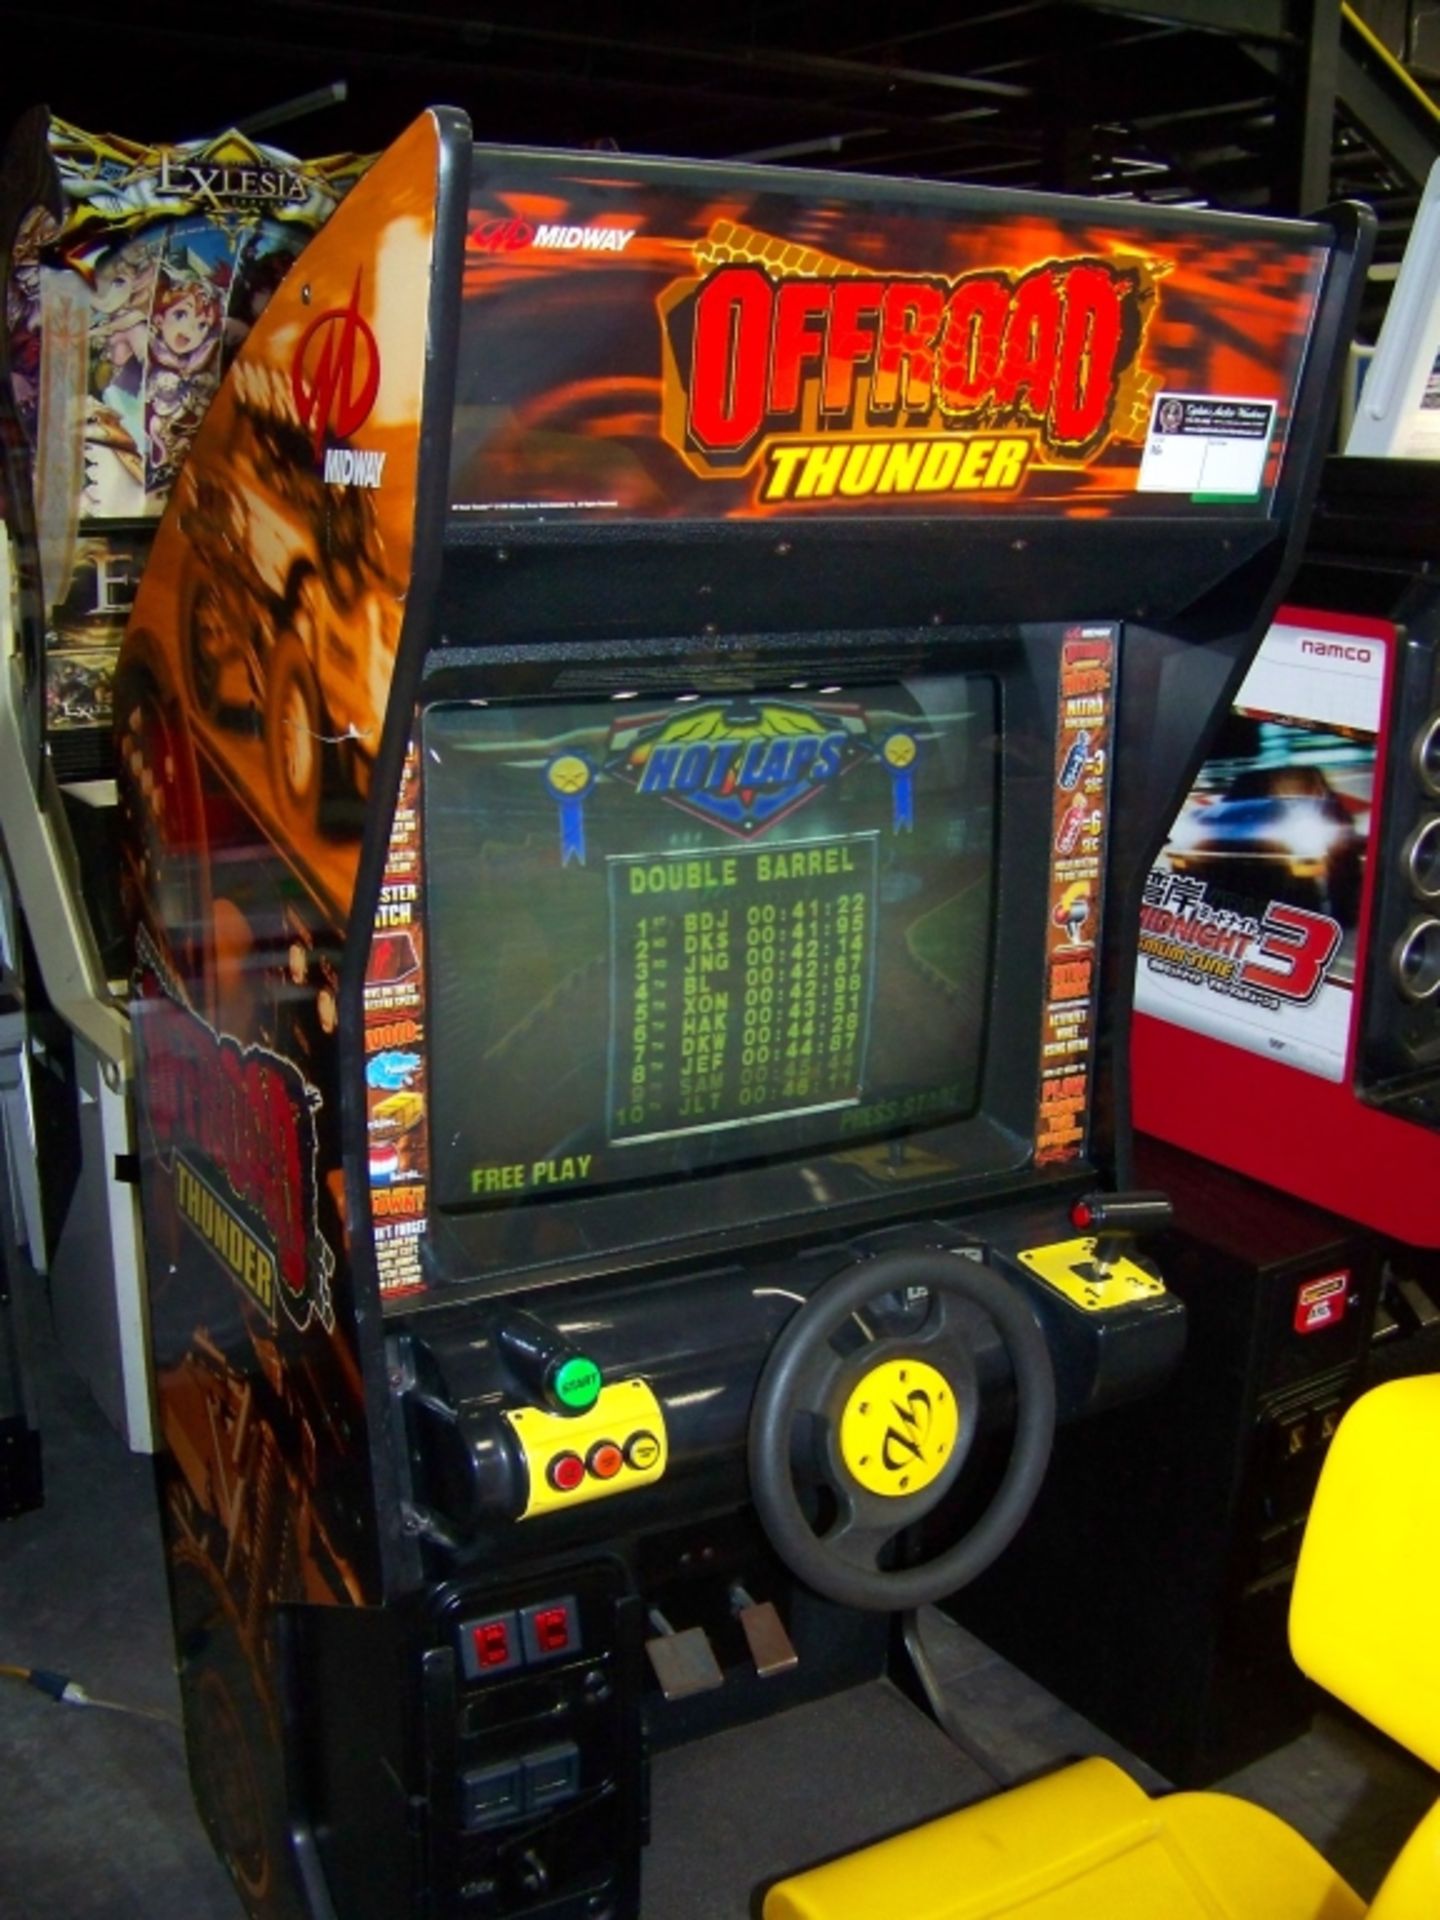 OFFROAD THUNDER MIDWAY RACING ARCADE GAME - Image 2 of 7